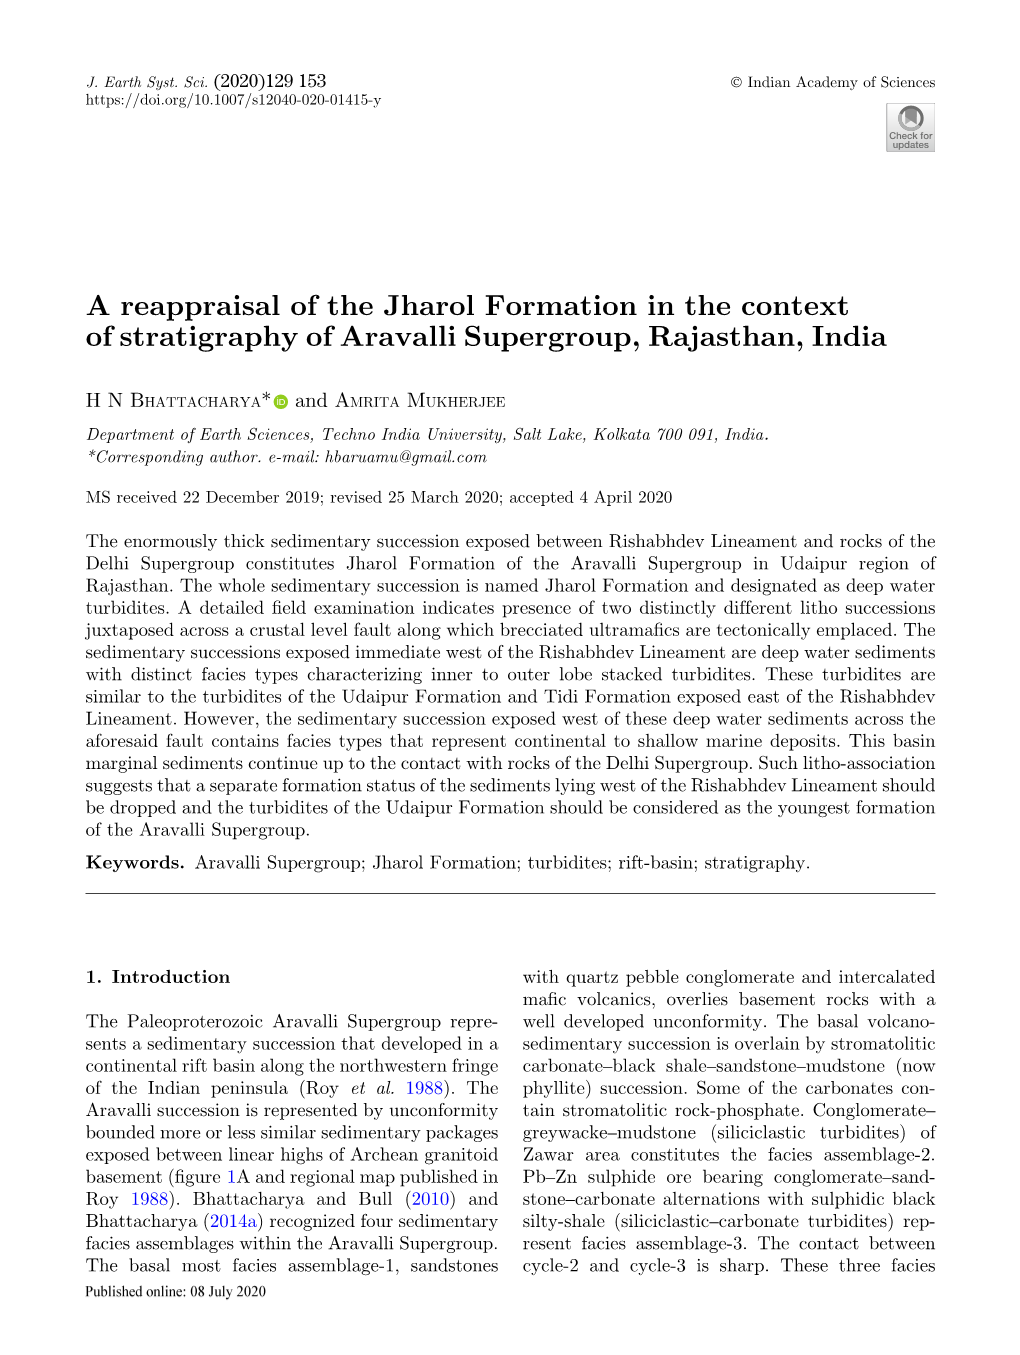 A Reappraisal of the Jharol Formation in the Context of Stratigraphy of Aravalli Supergroup, Rajasthan, India